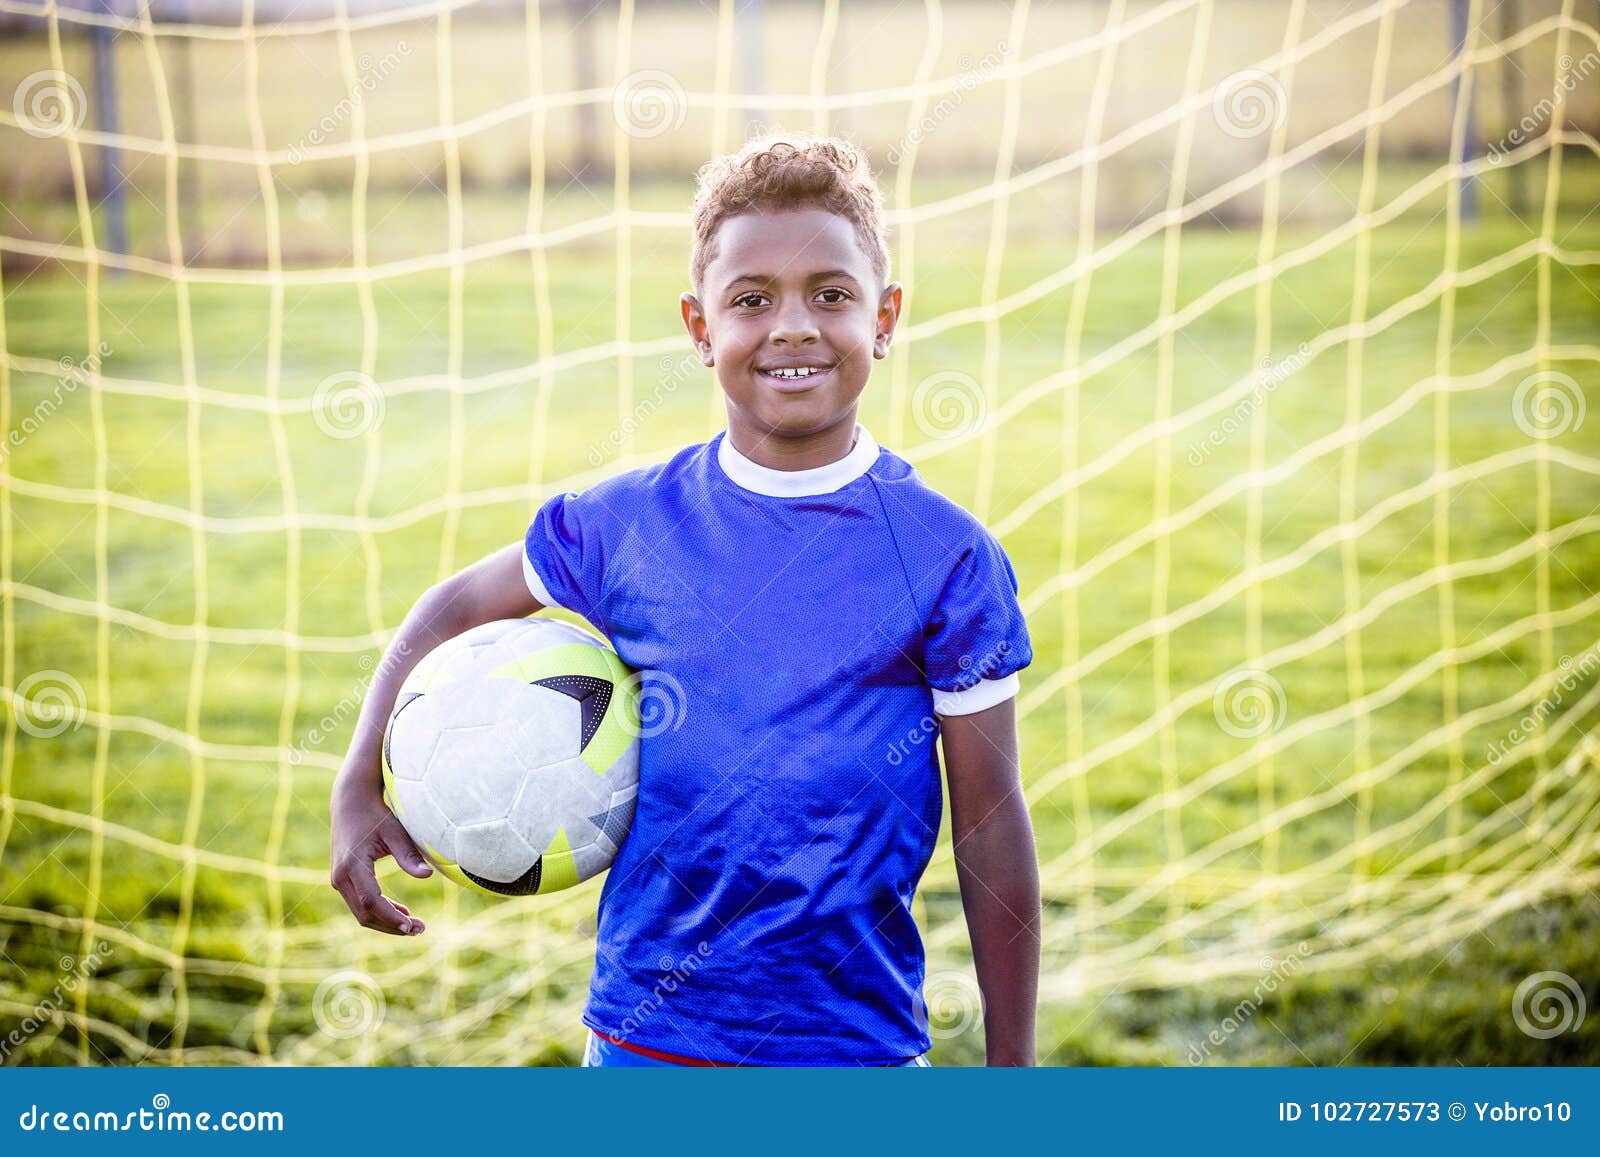 diverse young boy on a youth soccer team